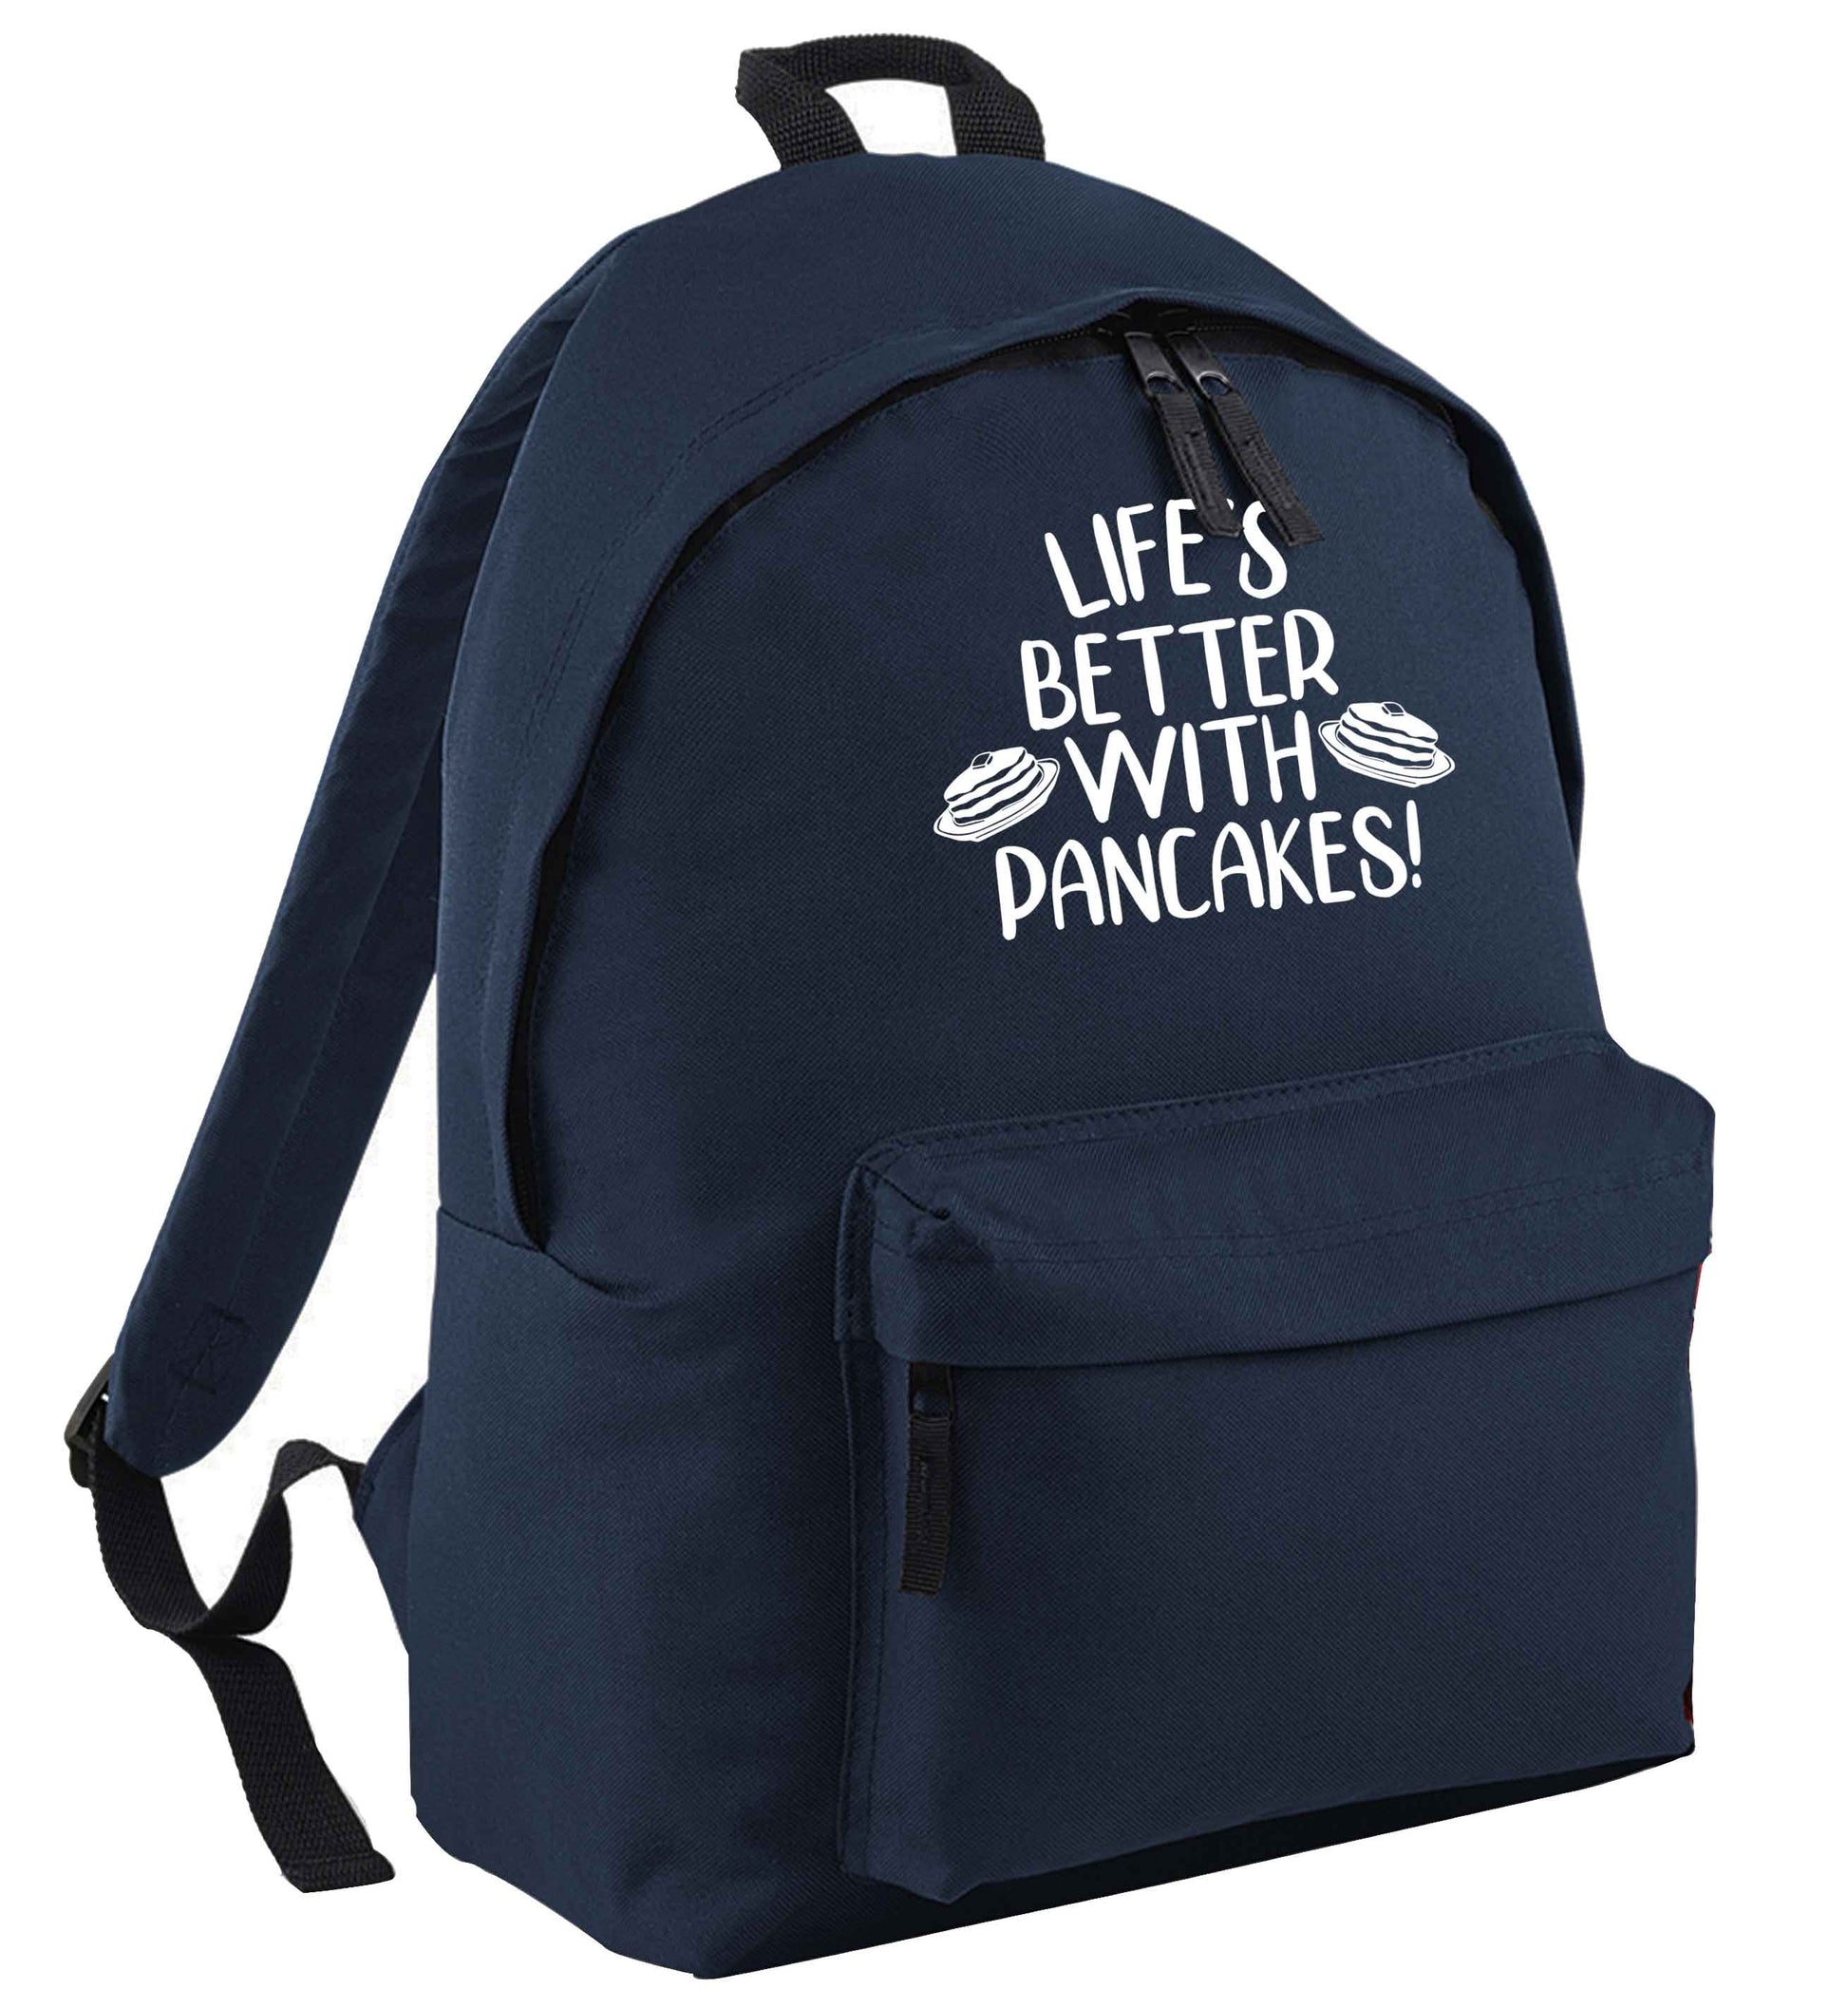 Life's better with pancakes navy adults backpack